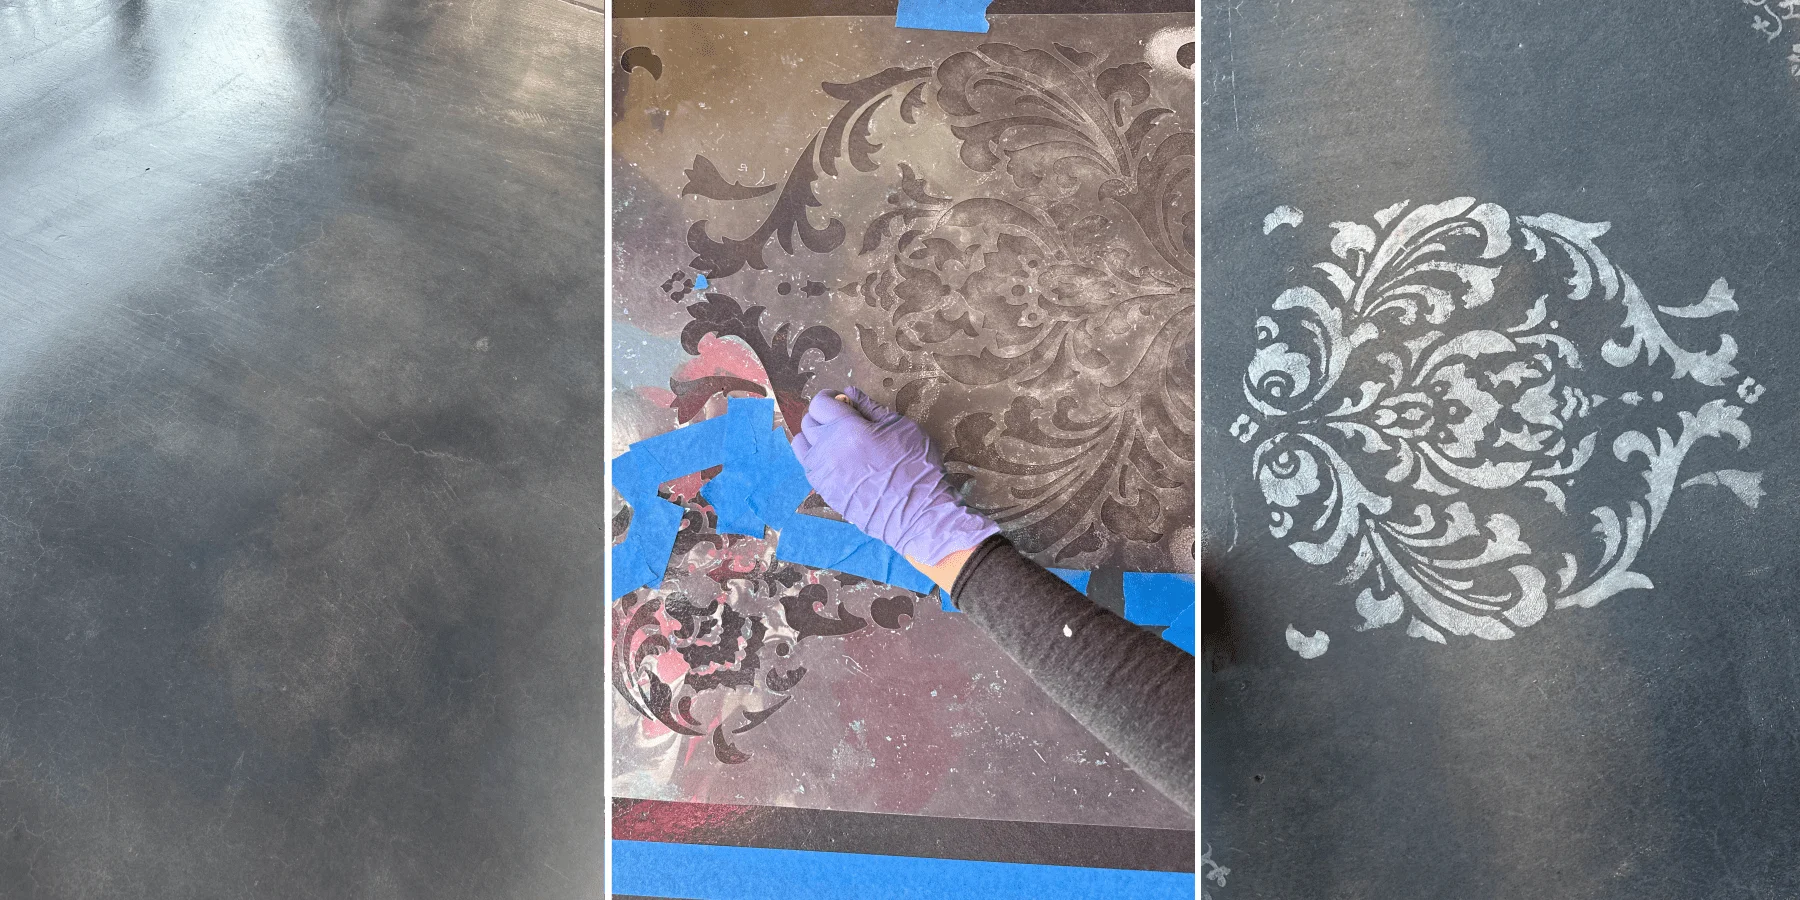 Damask pattern being applied to a stained porch. On the left, the bare stained surface; in the middle, the process of stenciling with a hand applying white acrylic paint over the sealed antiquing stain; on the right, the finished elegant white damask design on the porch